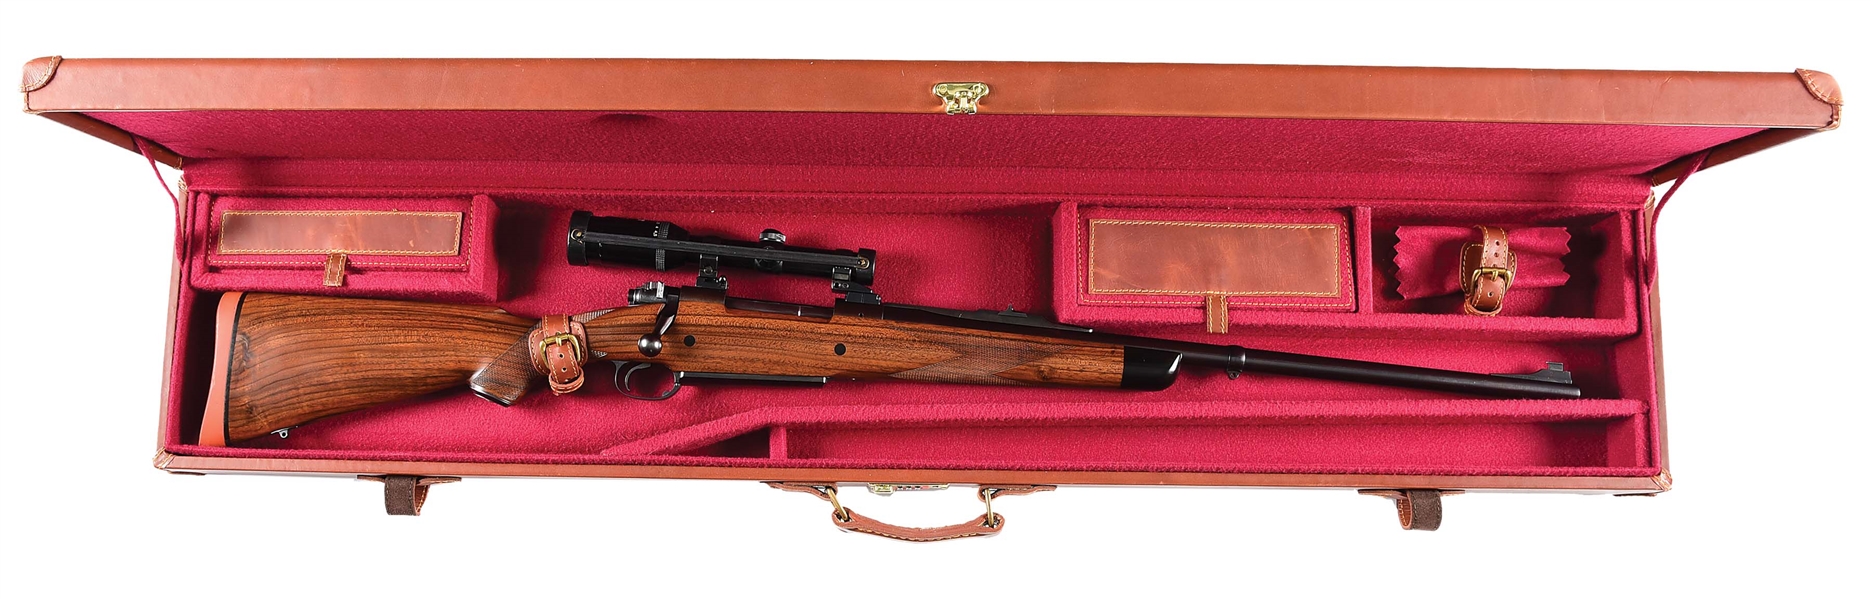 (M) DAKOTA ARMS AFRICAN RIFLE IN .416 RIGBY WITH SCOPE AND CASE.